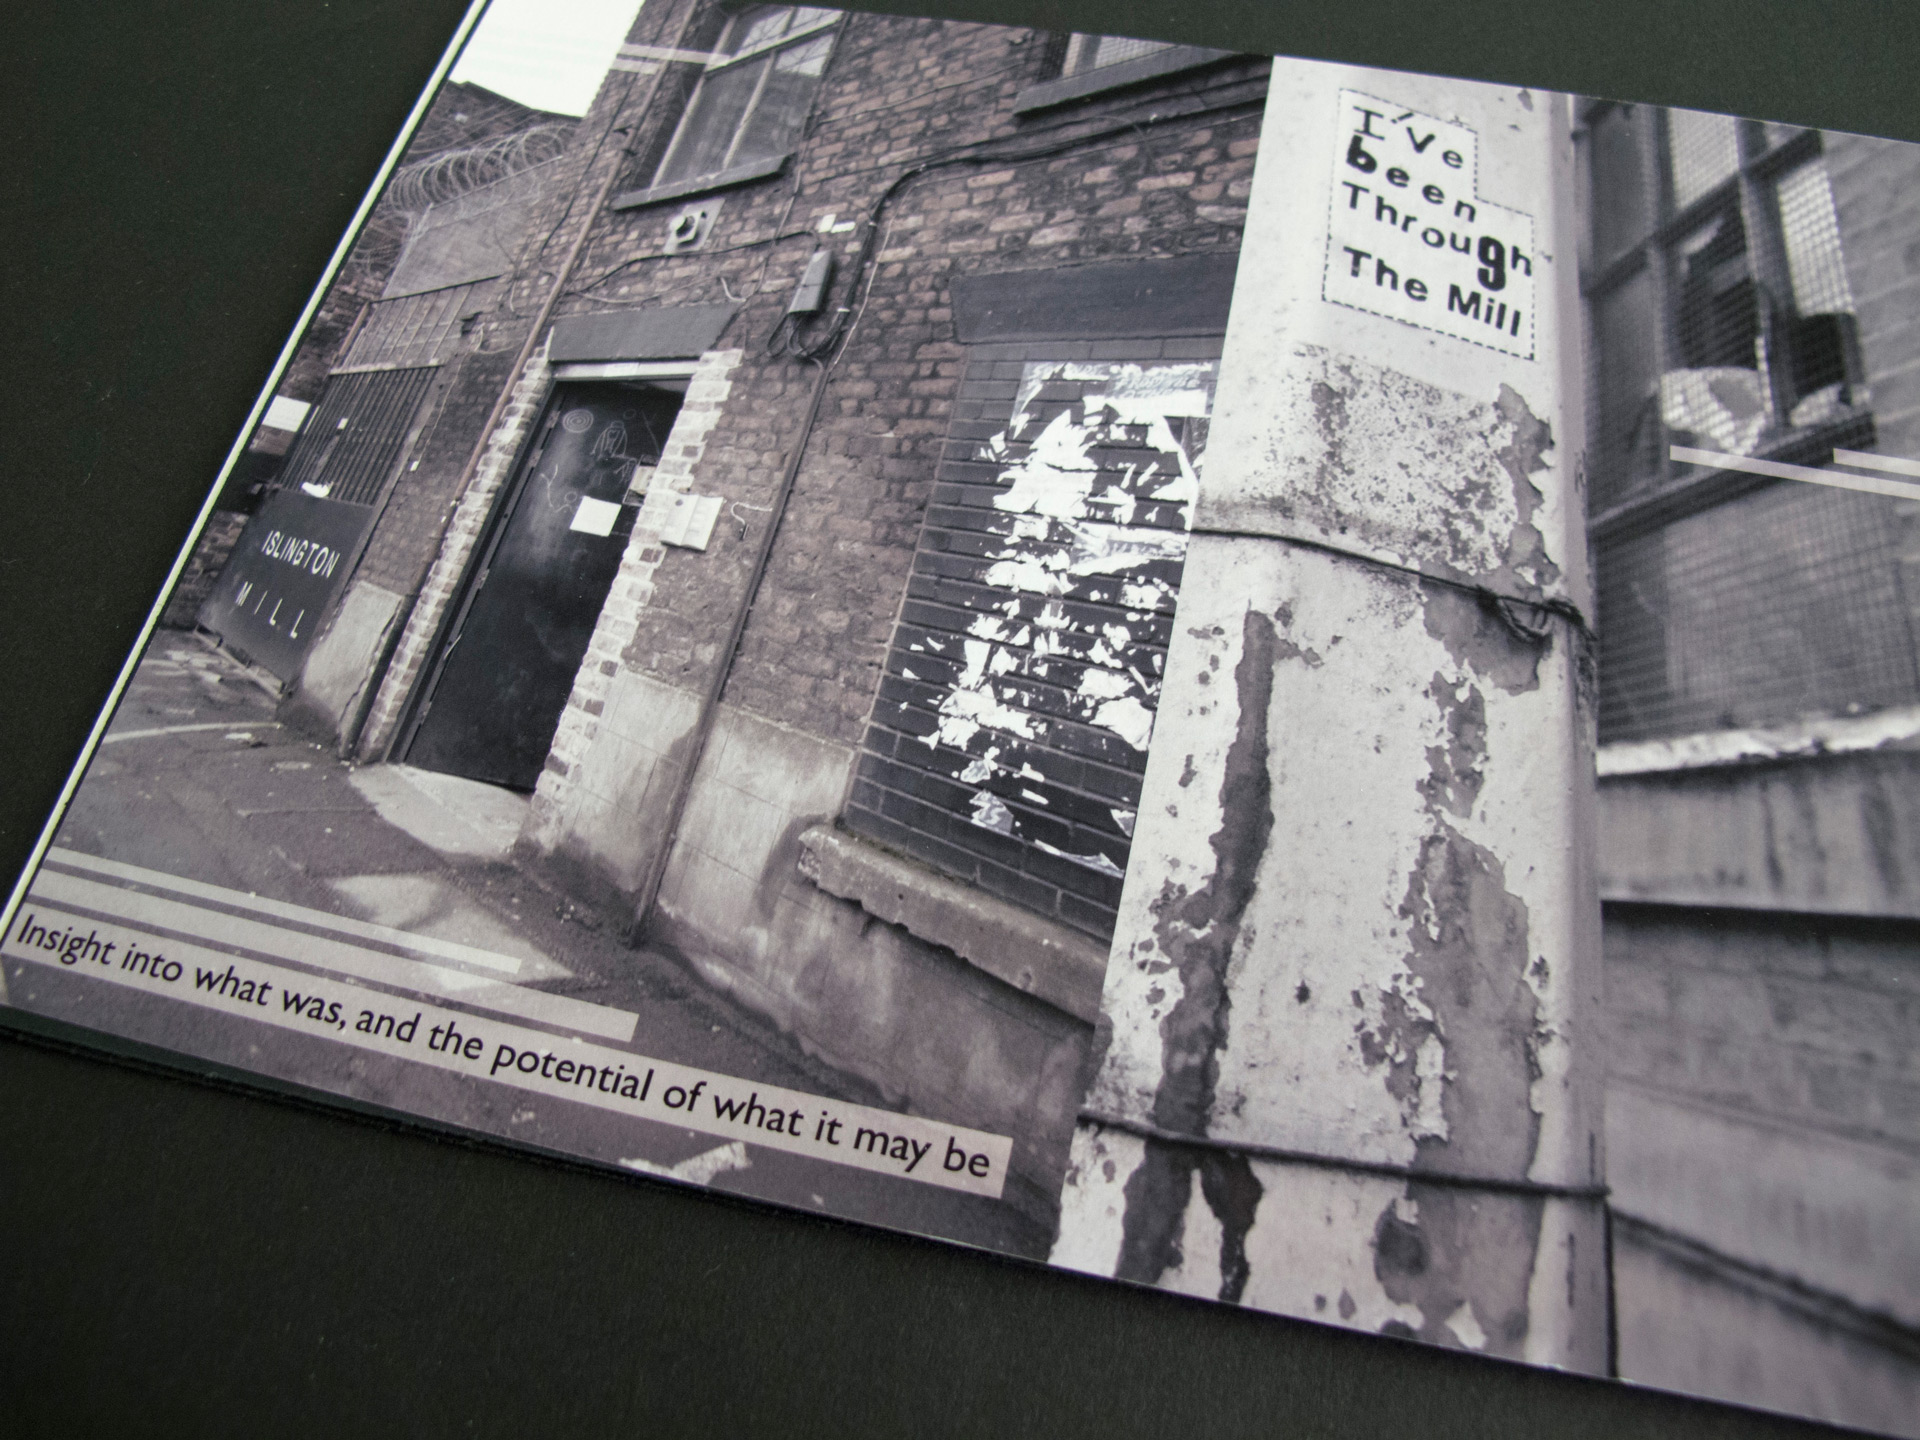 This booklet page features a desaturated photograph of a mill in Salford. A lamppost is in the foreground, with a sticker in jaunty type stating 'I've been through the mill'. Overlaid on the photograph are the words 'Insight into what was, and the potential of what it may be'. 